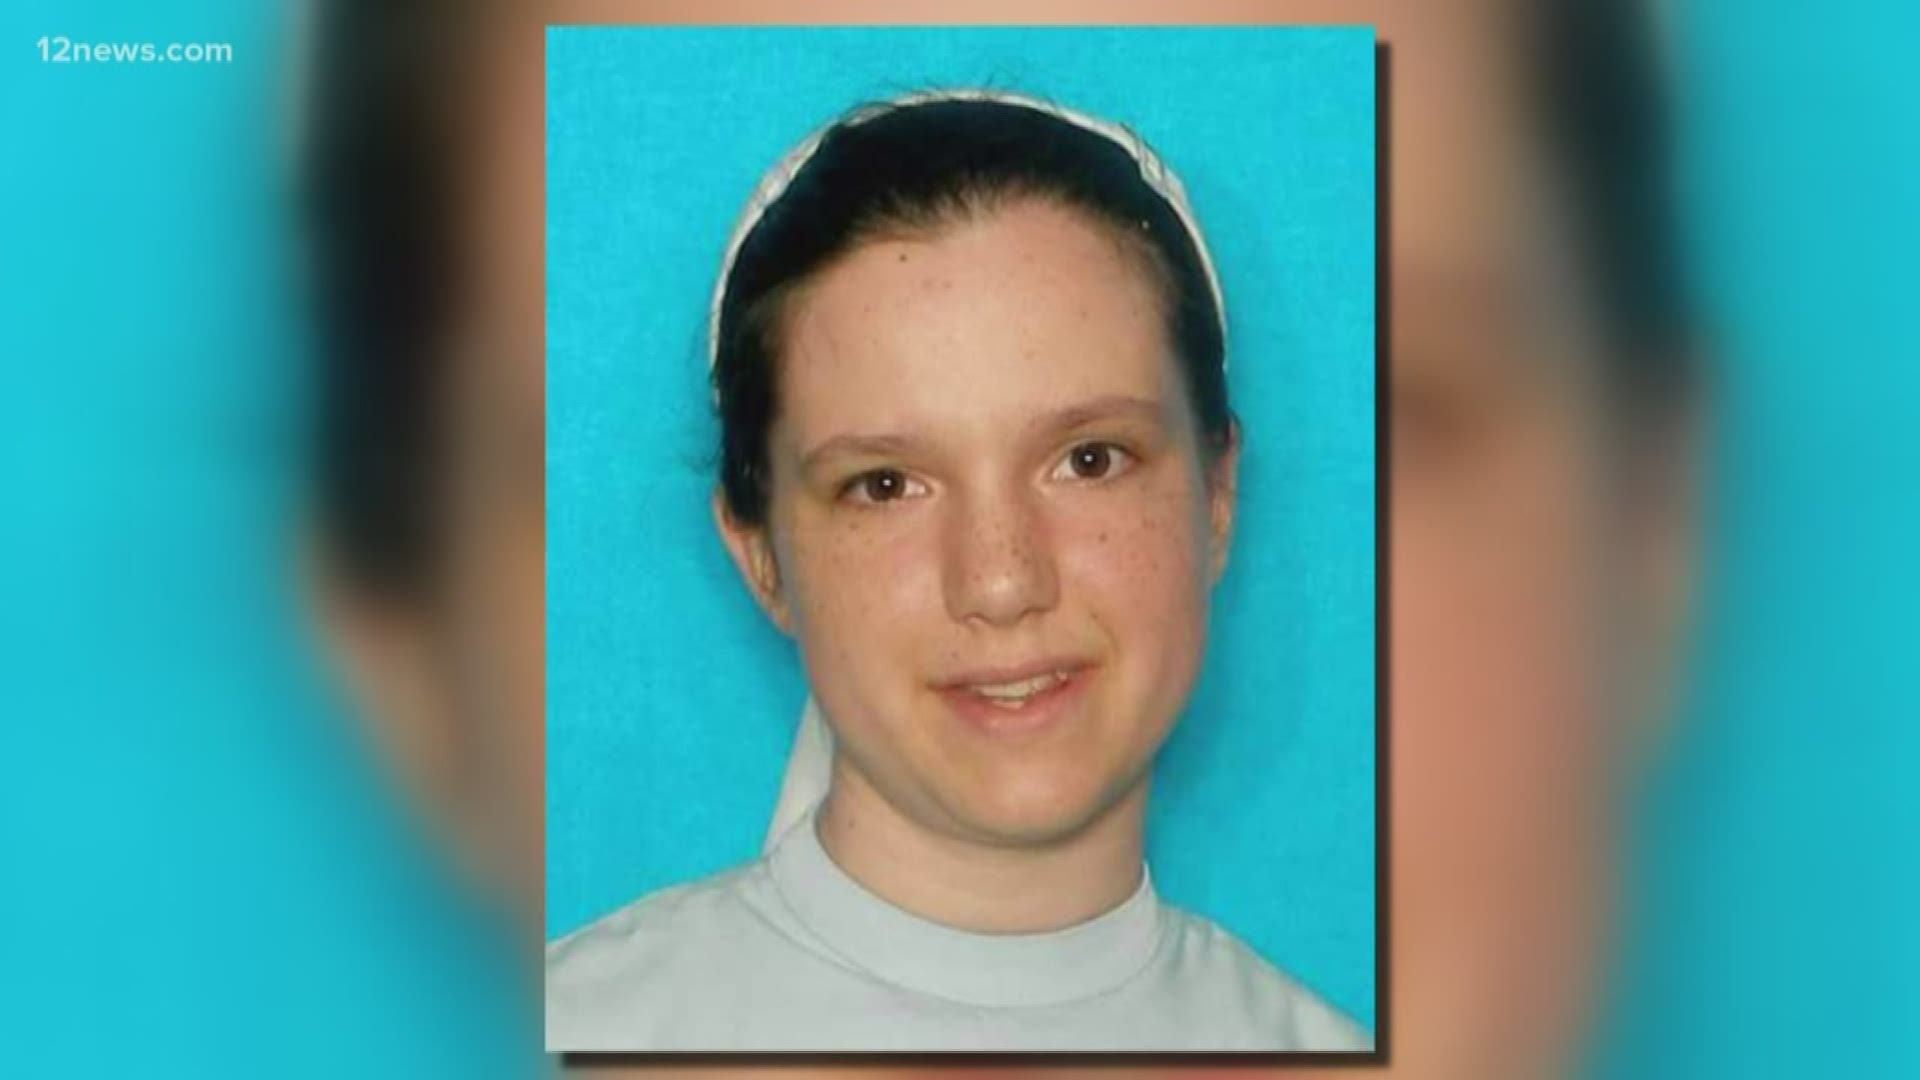 The FBI is investigating after Sasha Krause was found dead north of Flagstaff. A sheriff's department in New Mexico searched for her for weeks.